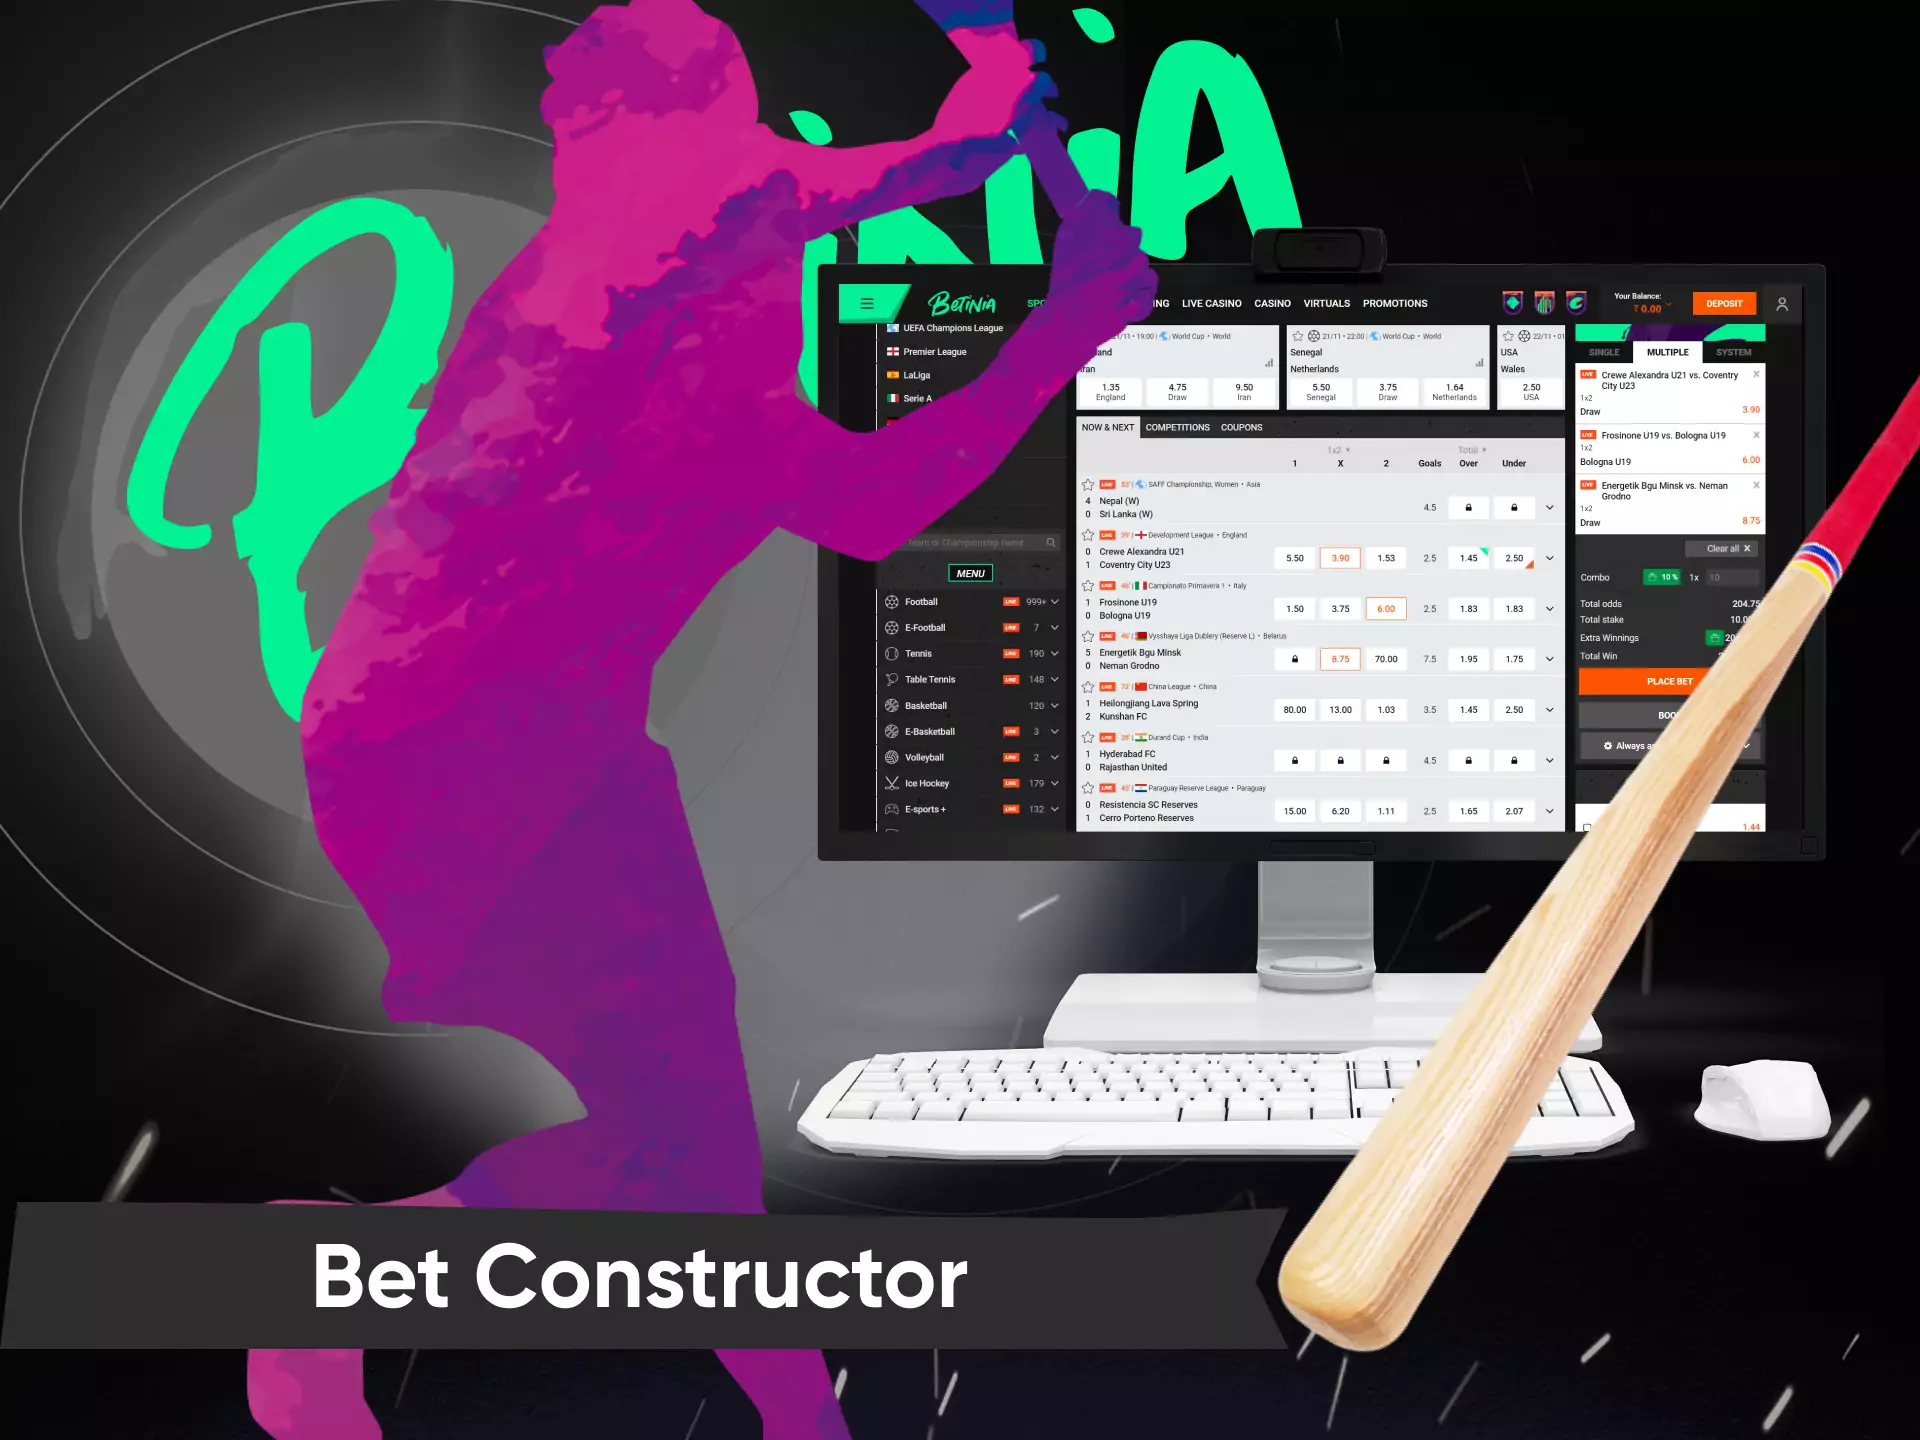 There is a special constructor on Betinia for making mixed bets.